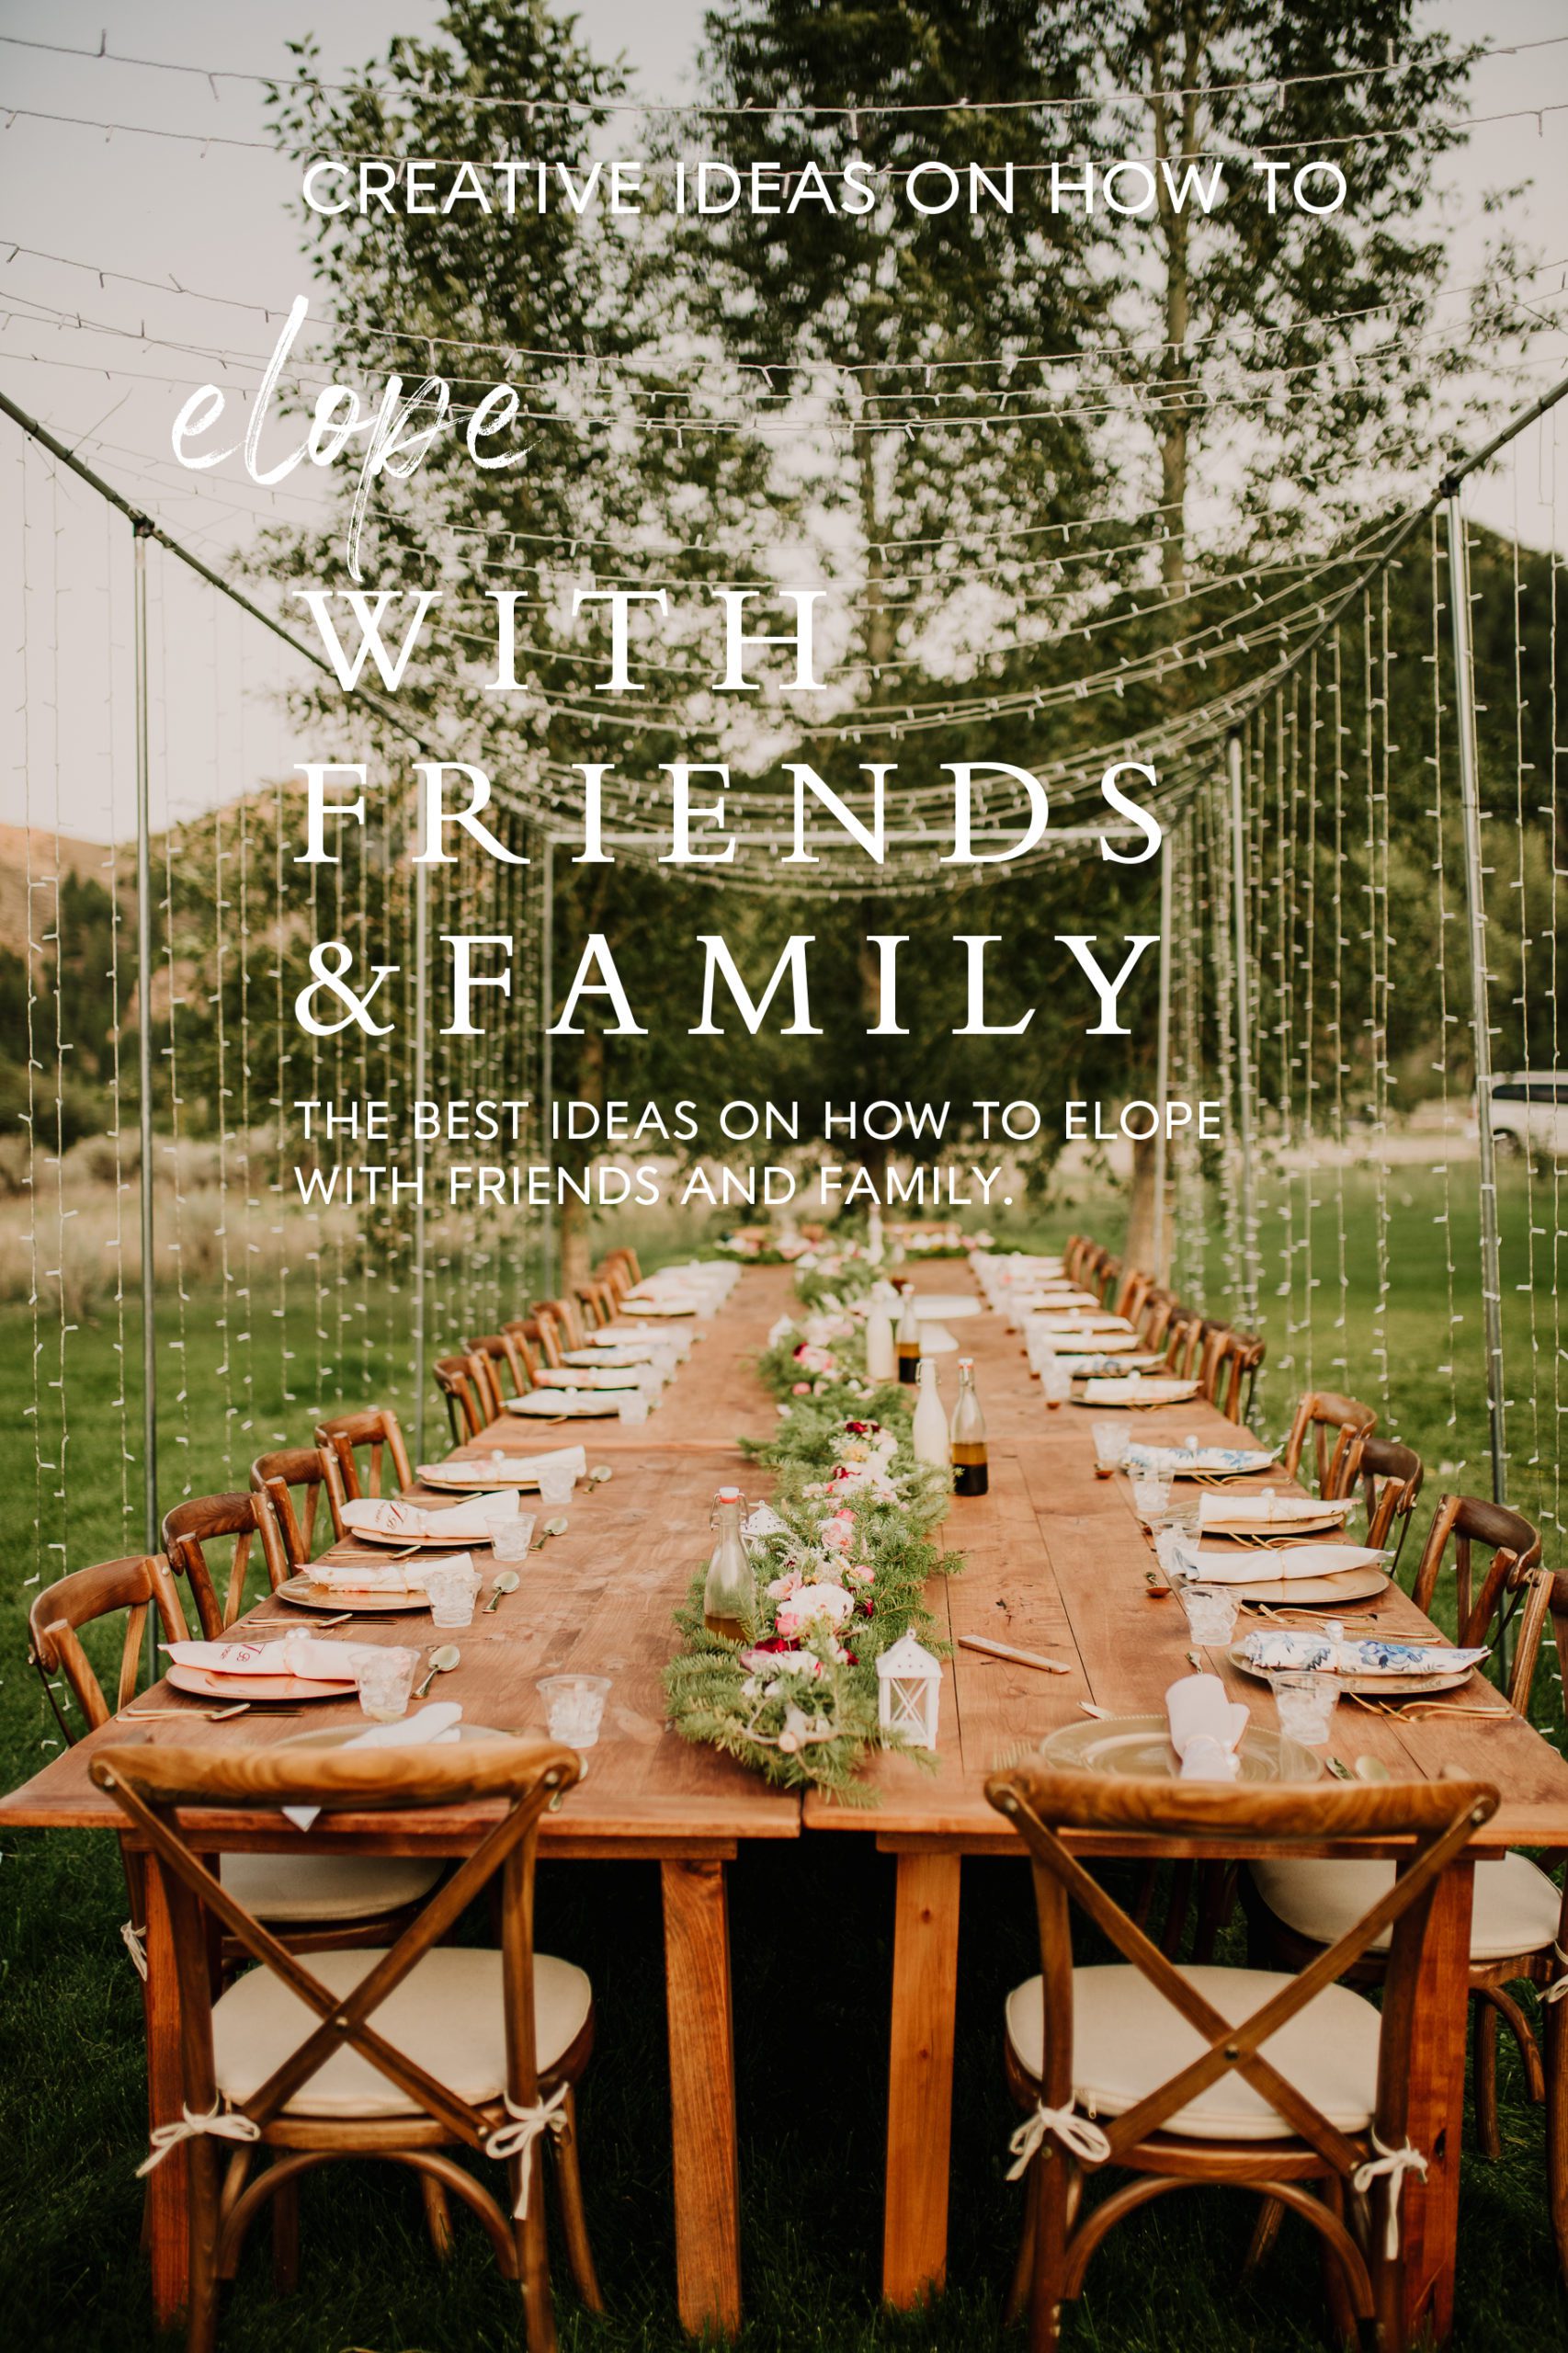 The best ideas on how to elope with friends and family, whether they are there in spirit or part of your elopement, make your wedding special.